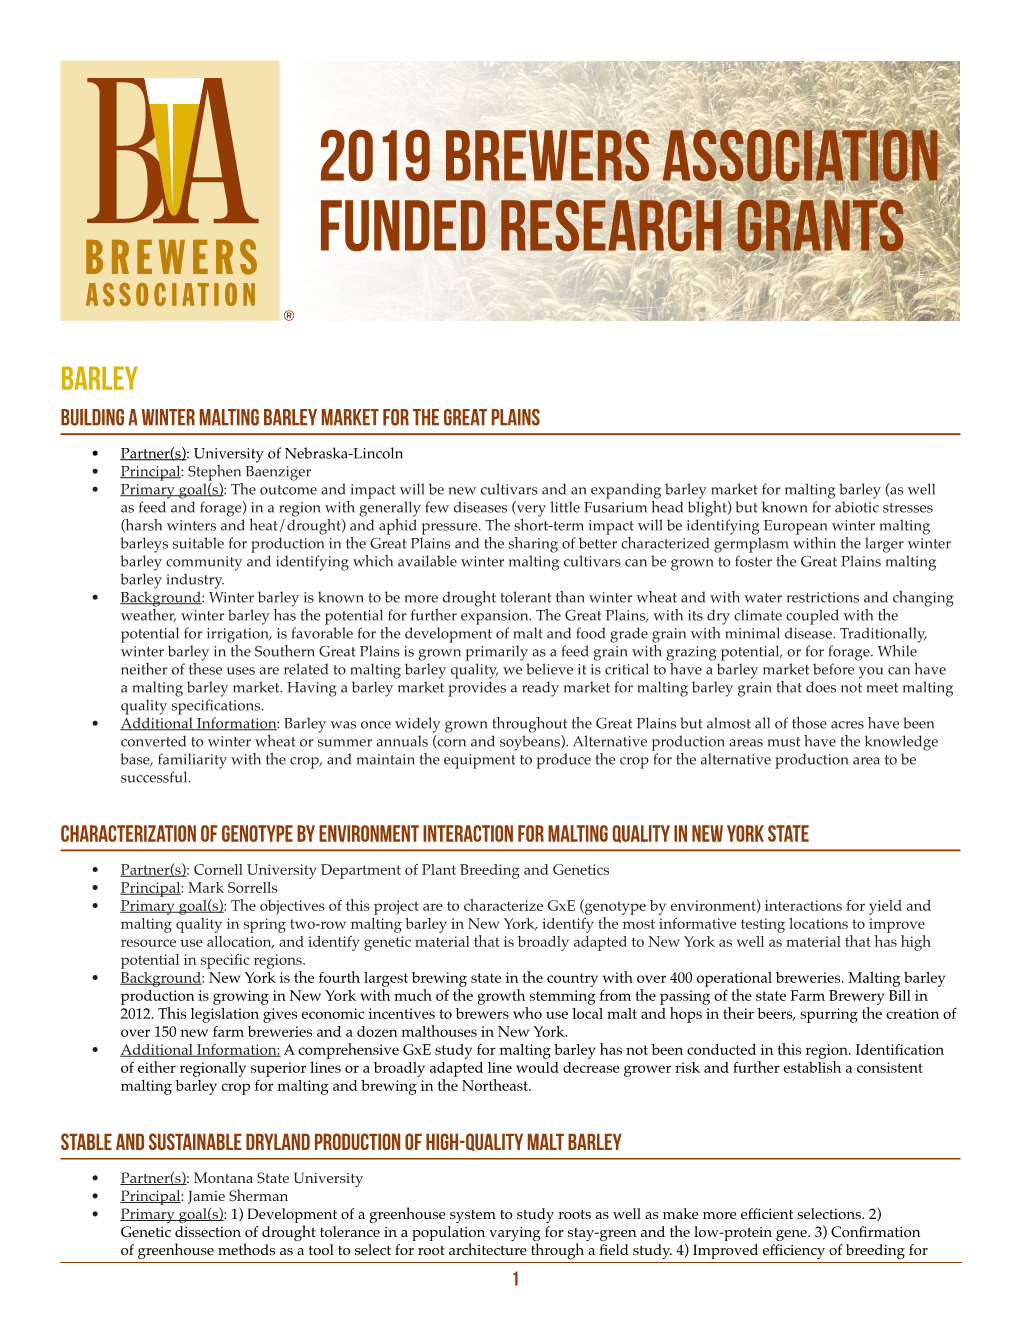 2019 Brewers Association Funded Research Grants